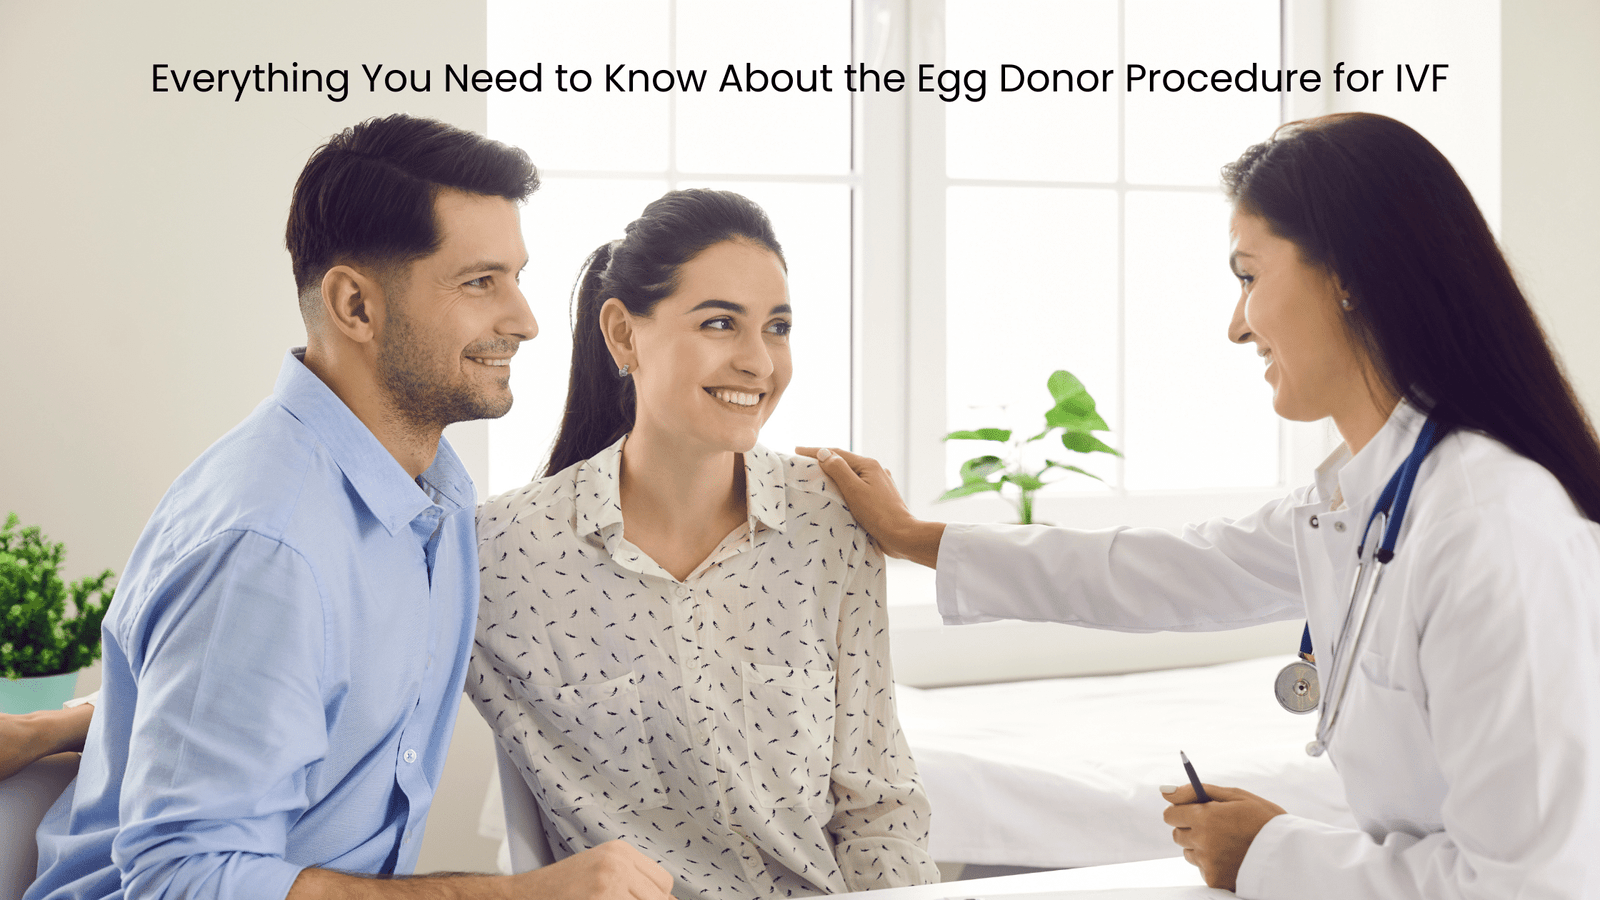 Everything You Need to Know About the Egg Donor Procedure for IVF